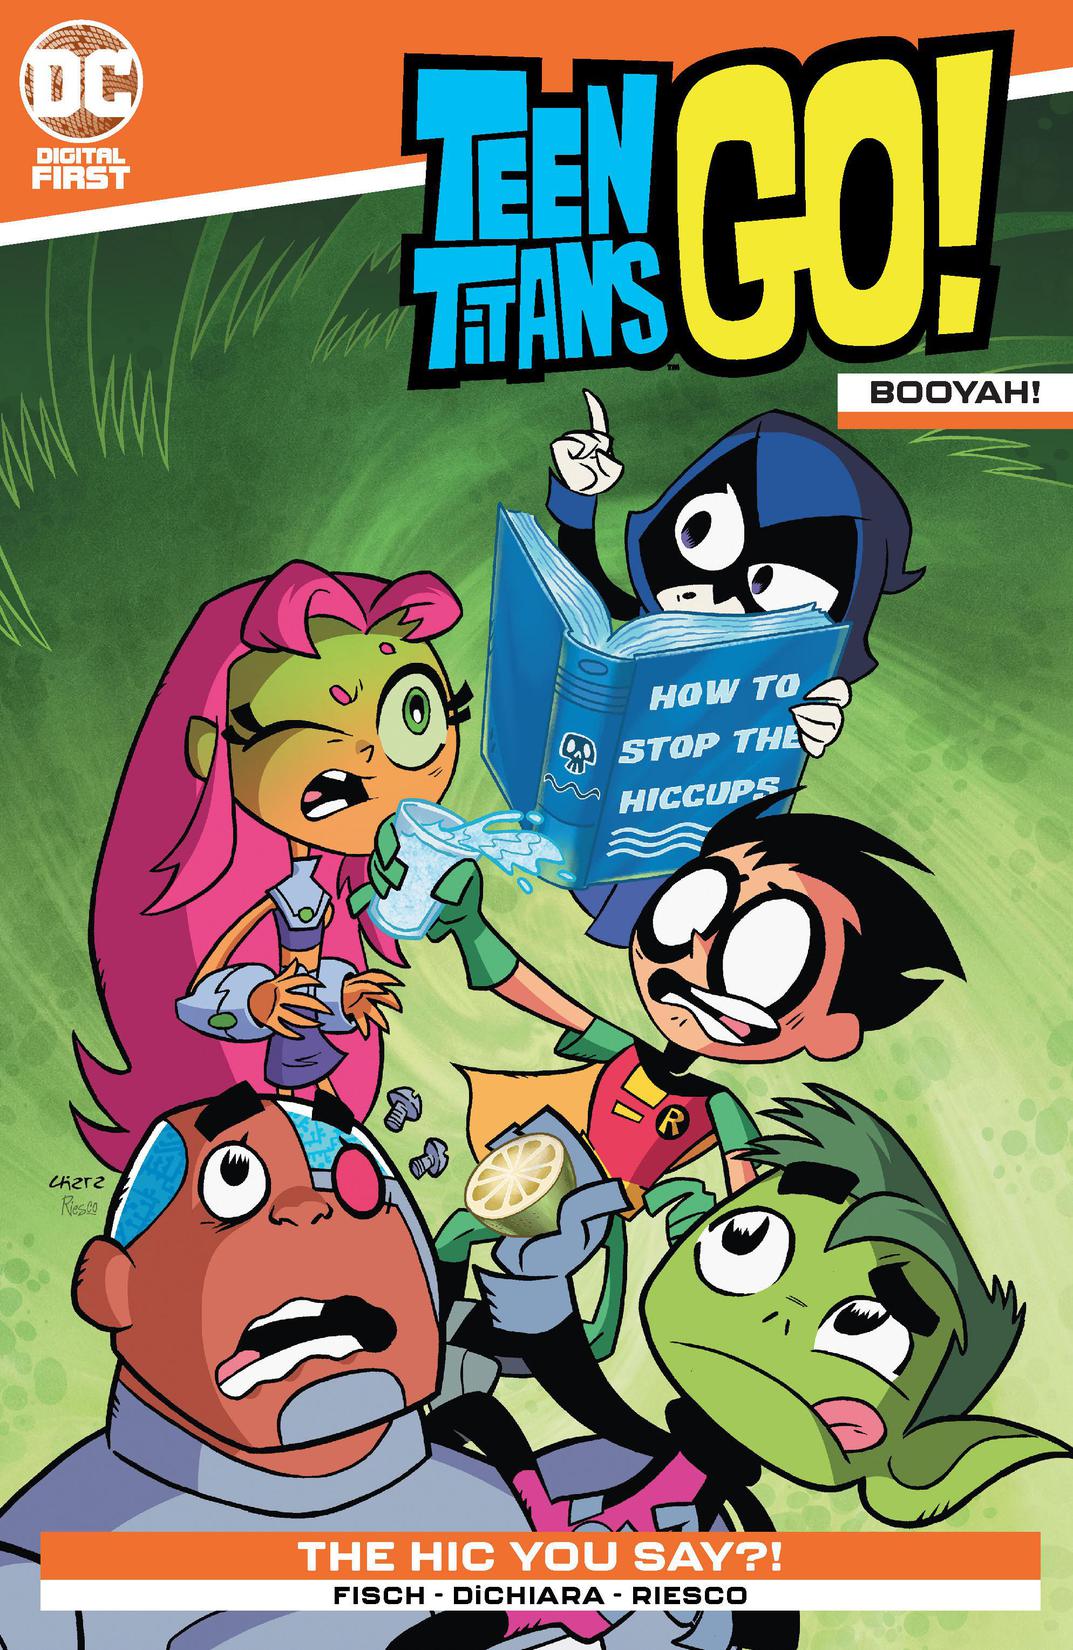 Teen Titans Go!: Booyah! #1 preview images